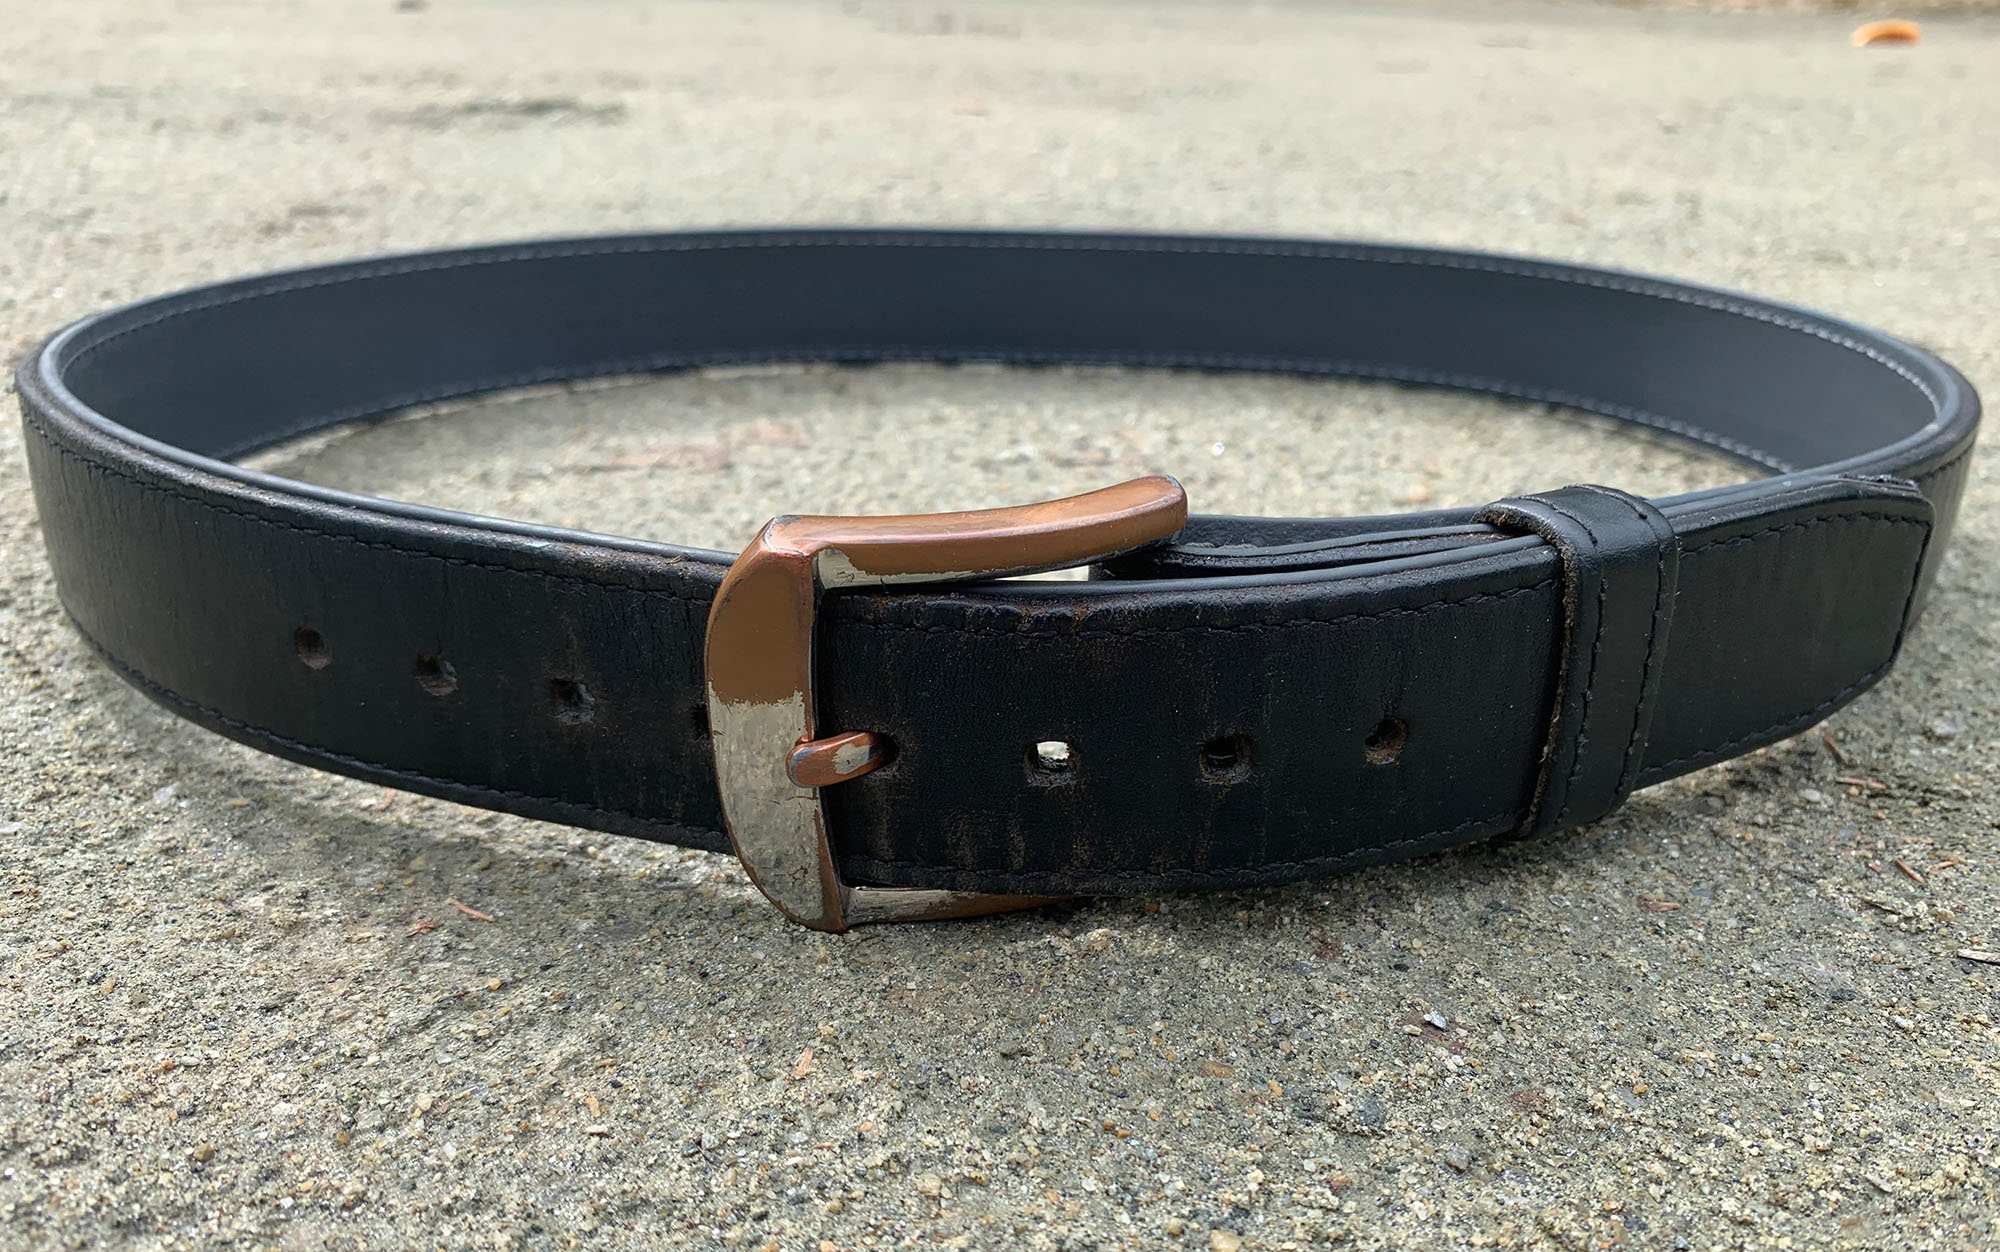 The Magpul is the best leather gun belt.